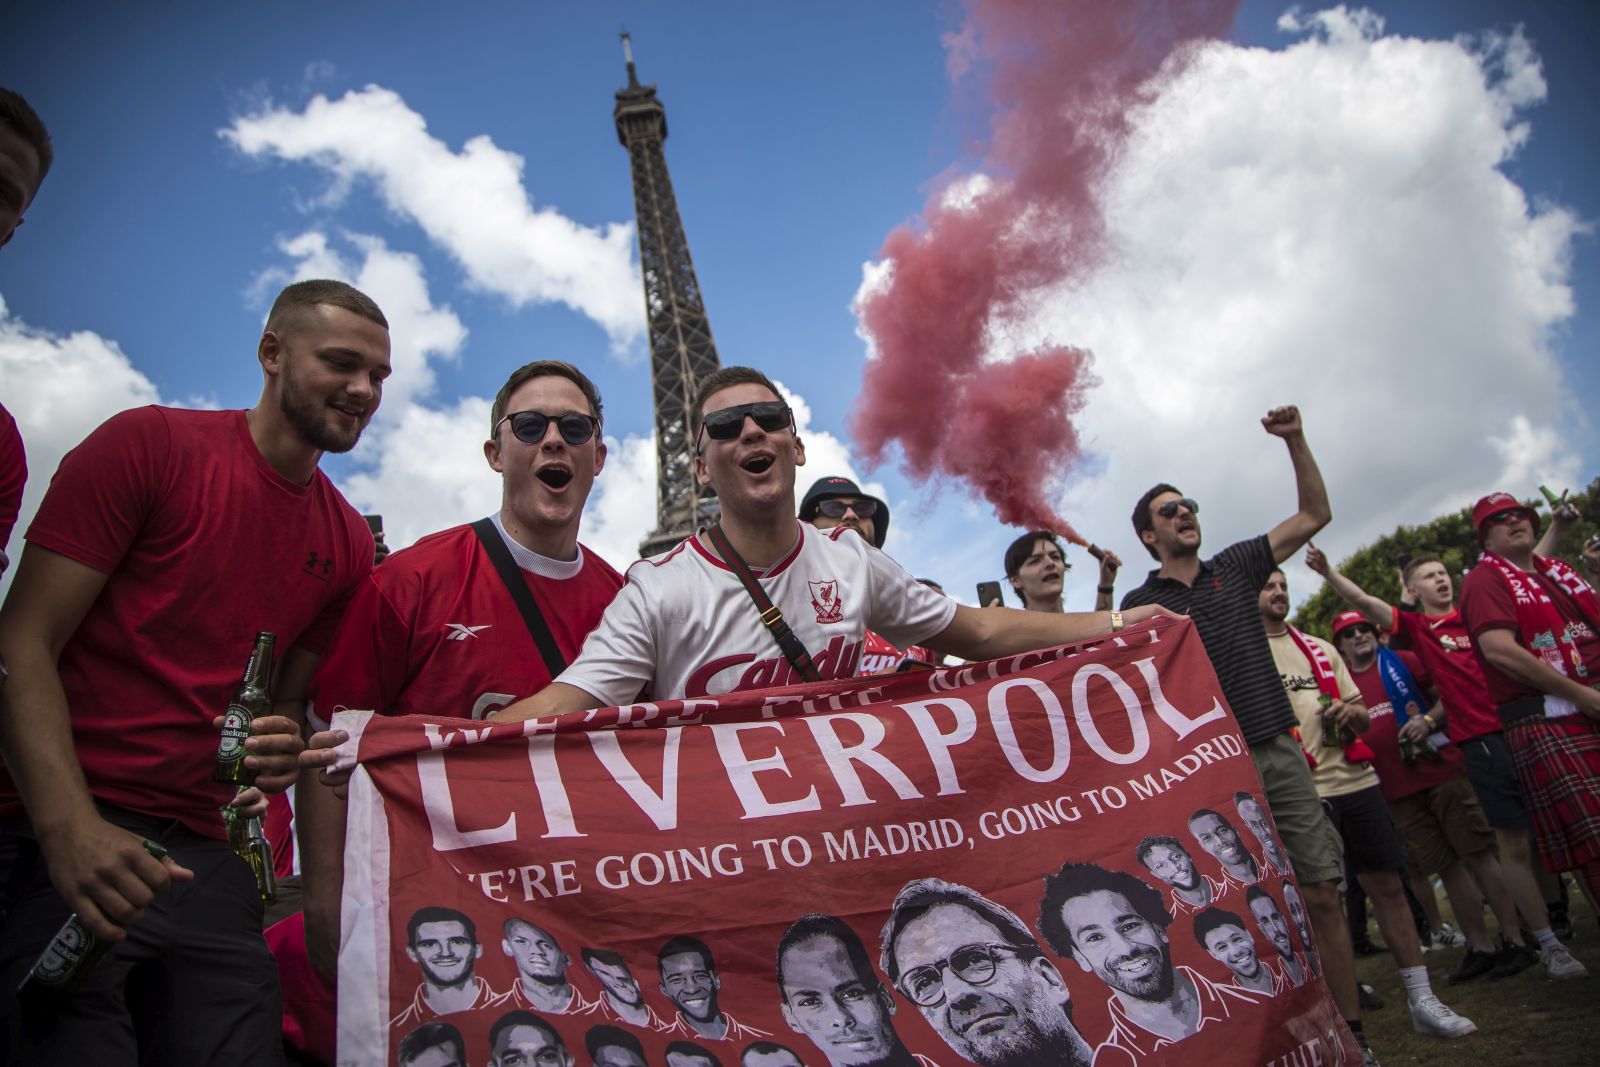 epa09981692 Liverpool's fans cheer for their team as they gather near the Eiffel Tower (rear) ahead of the UEFA Champions League final in Paris, France, 28 May 2022. Paris hosts the UEFA Champions League final between Real Madrid and Liverpool FC on 28 May 2022.  EPA/CHRISTOPHE PETIT TESSON